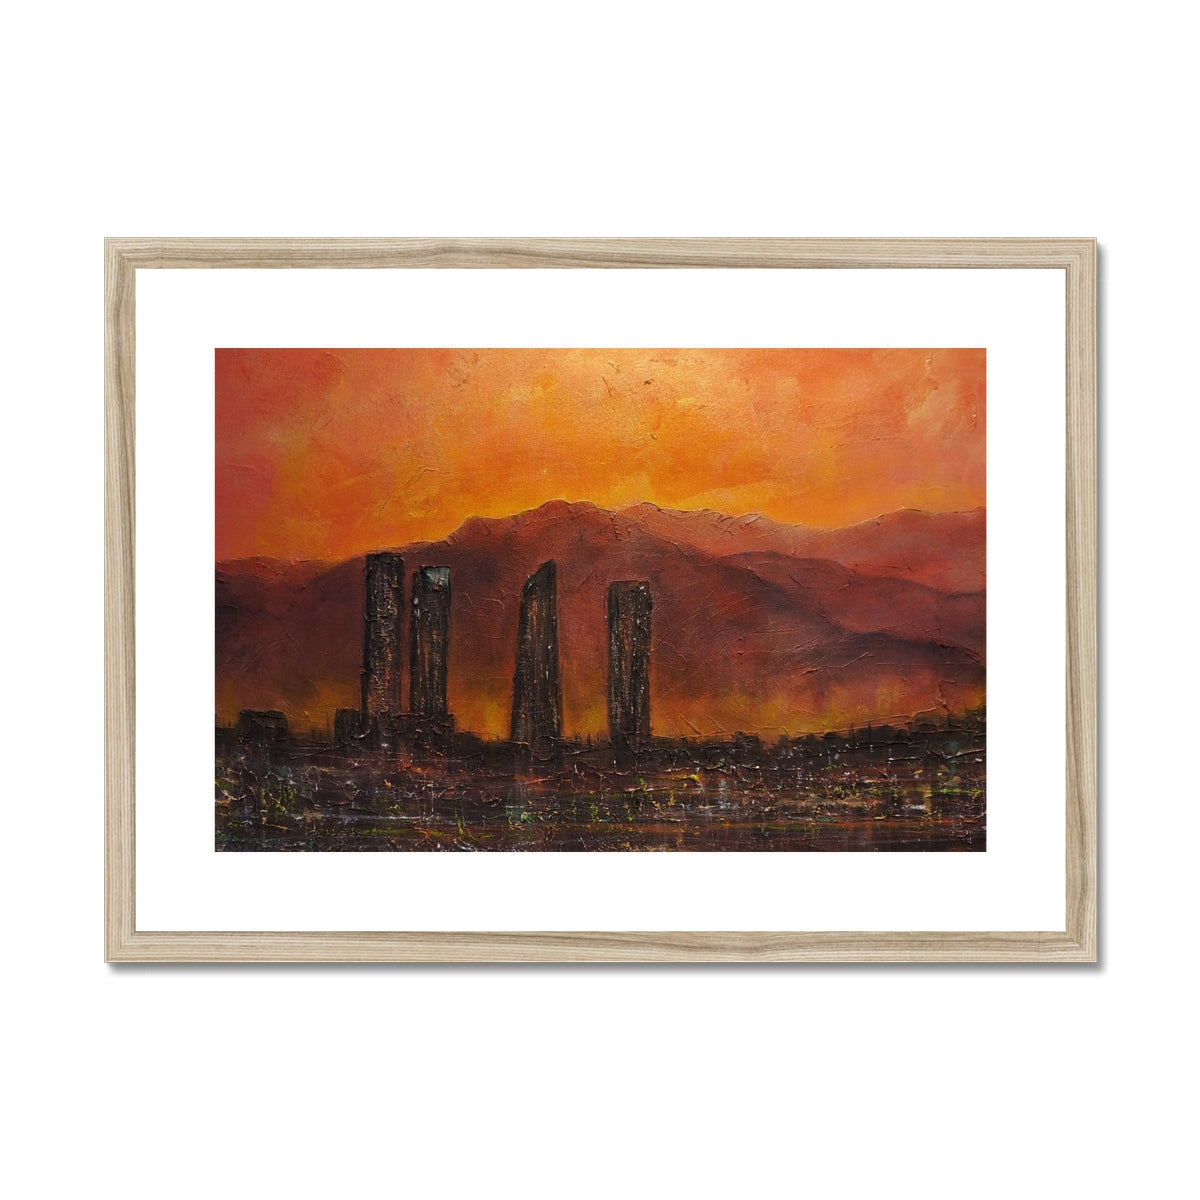 Madrid Dusk Painting | Framed & Mounted Prints From Scotland-Framed & Mounted Prints-World Art Gallery-A2 Landscape-Natural Frame-Paintings, Prints, Homeware, Art Gifts From Scotland By Scottish Artist Kevin Hunter